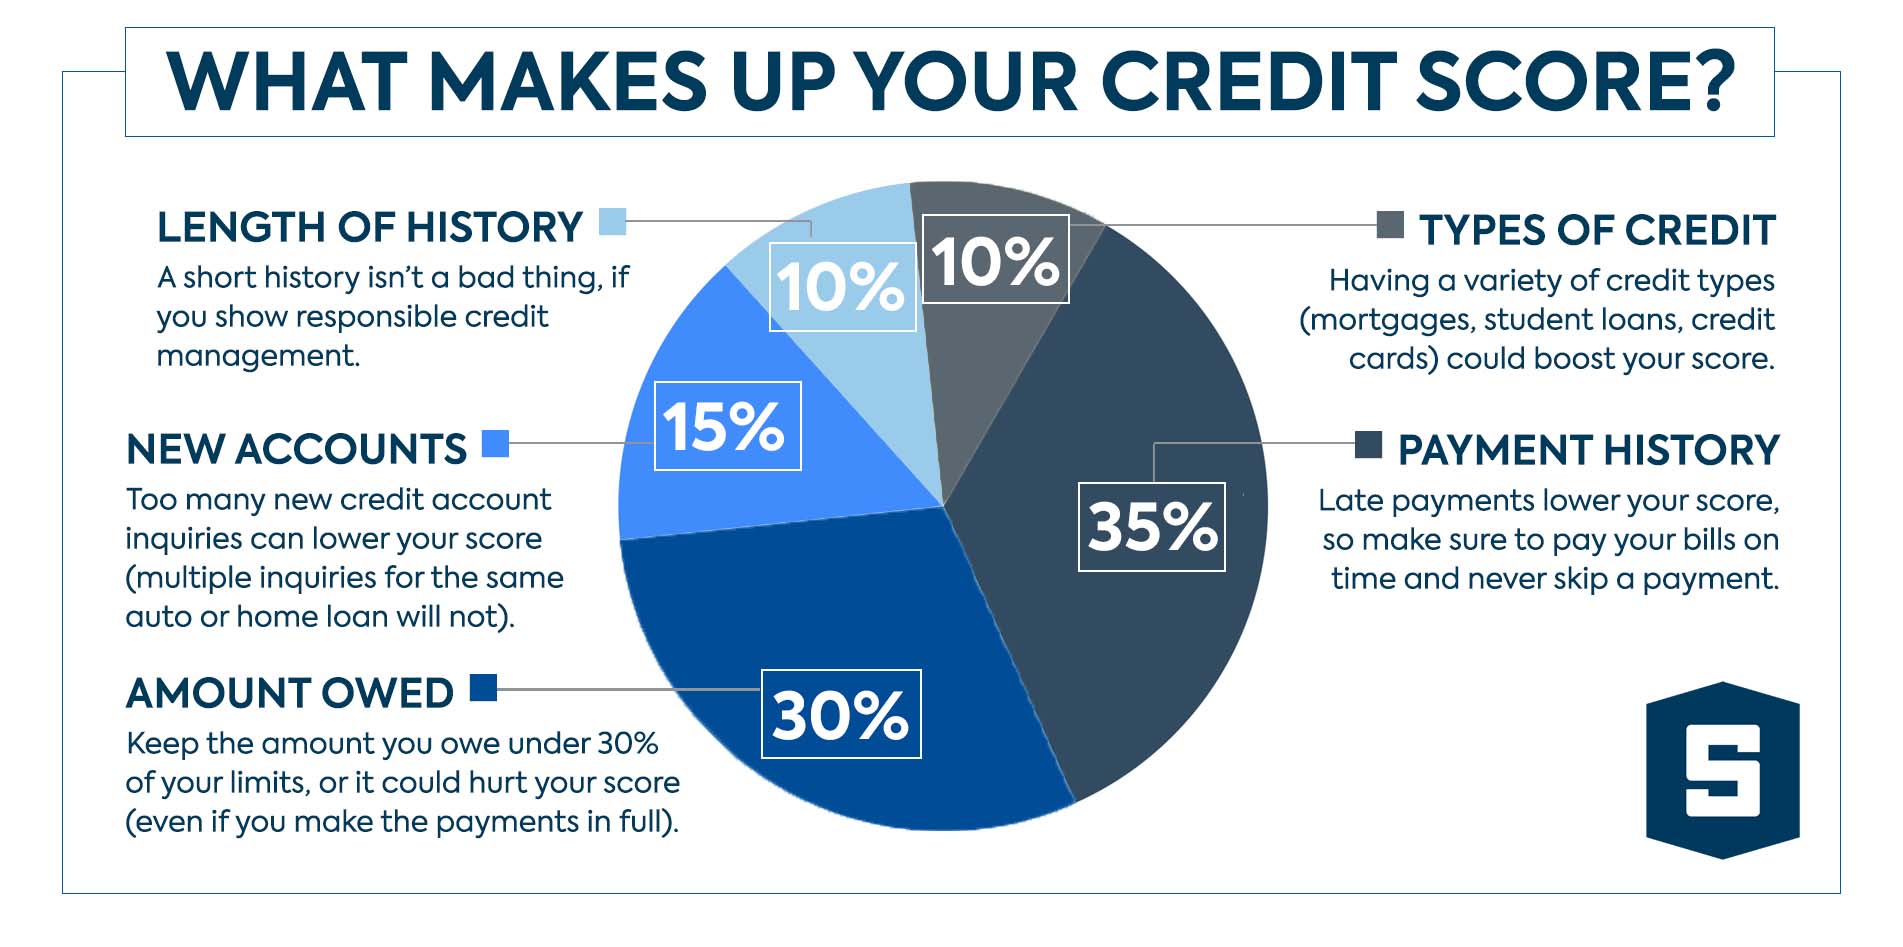 how does a mortgage impact your credit score